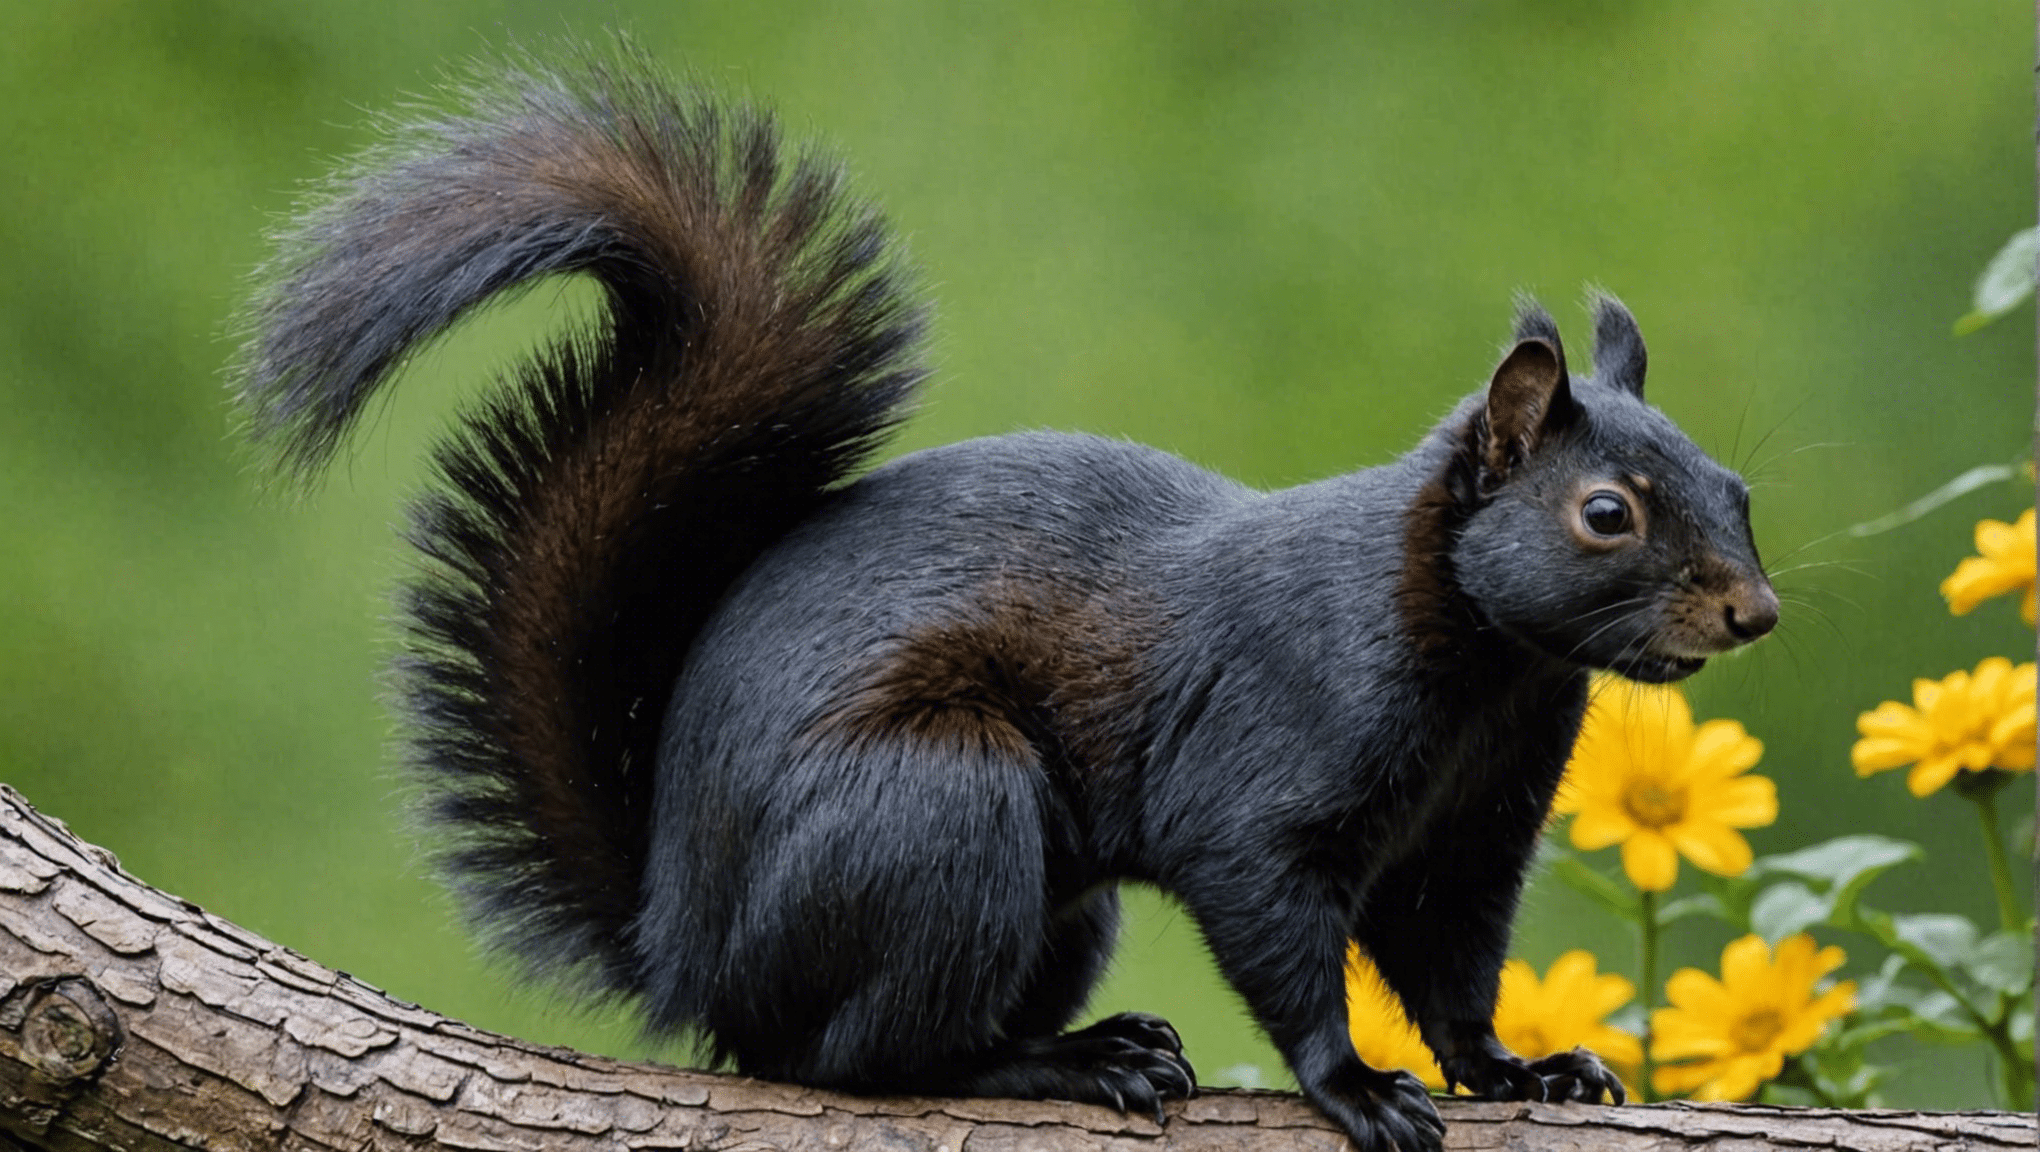 discover the cultural and ecological significance of the black squirrel and its impact on various communities.